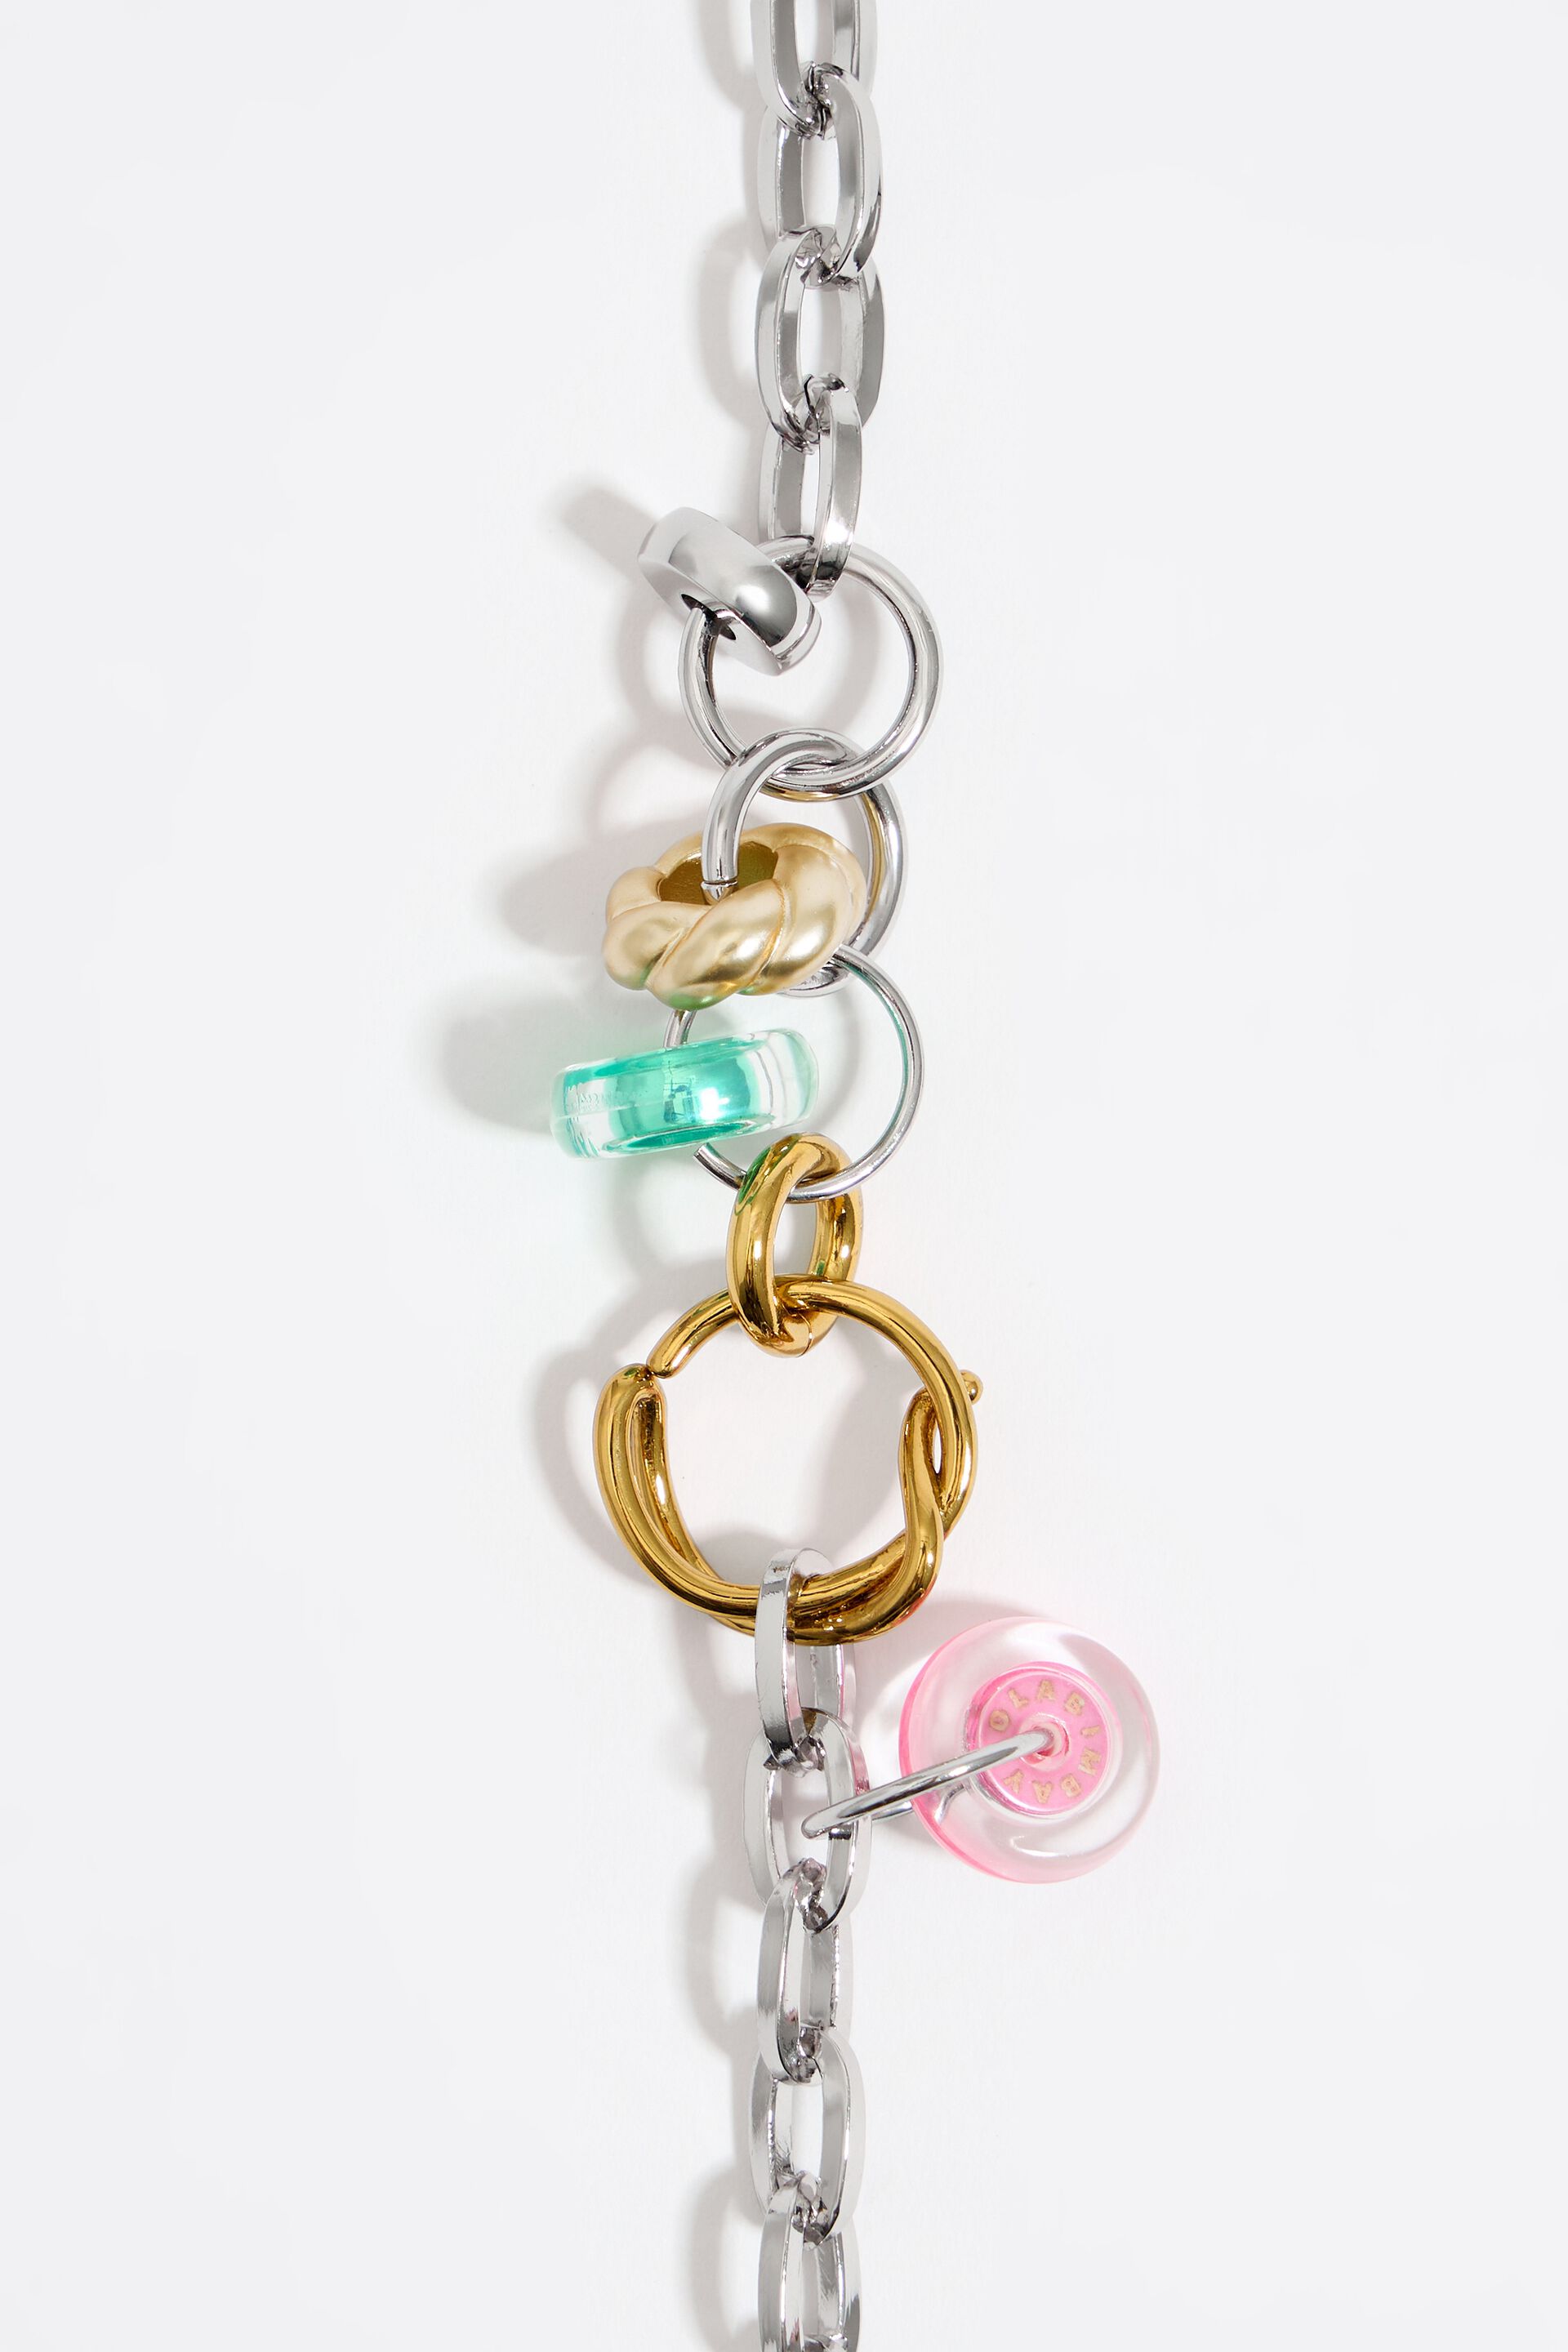 Louis Vuitton Multicolor Resin Candy Key Holder/Bag Charm